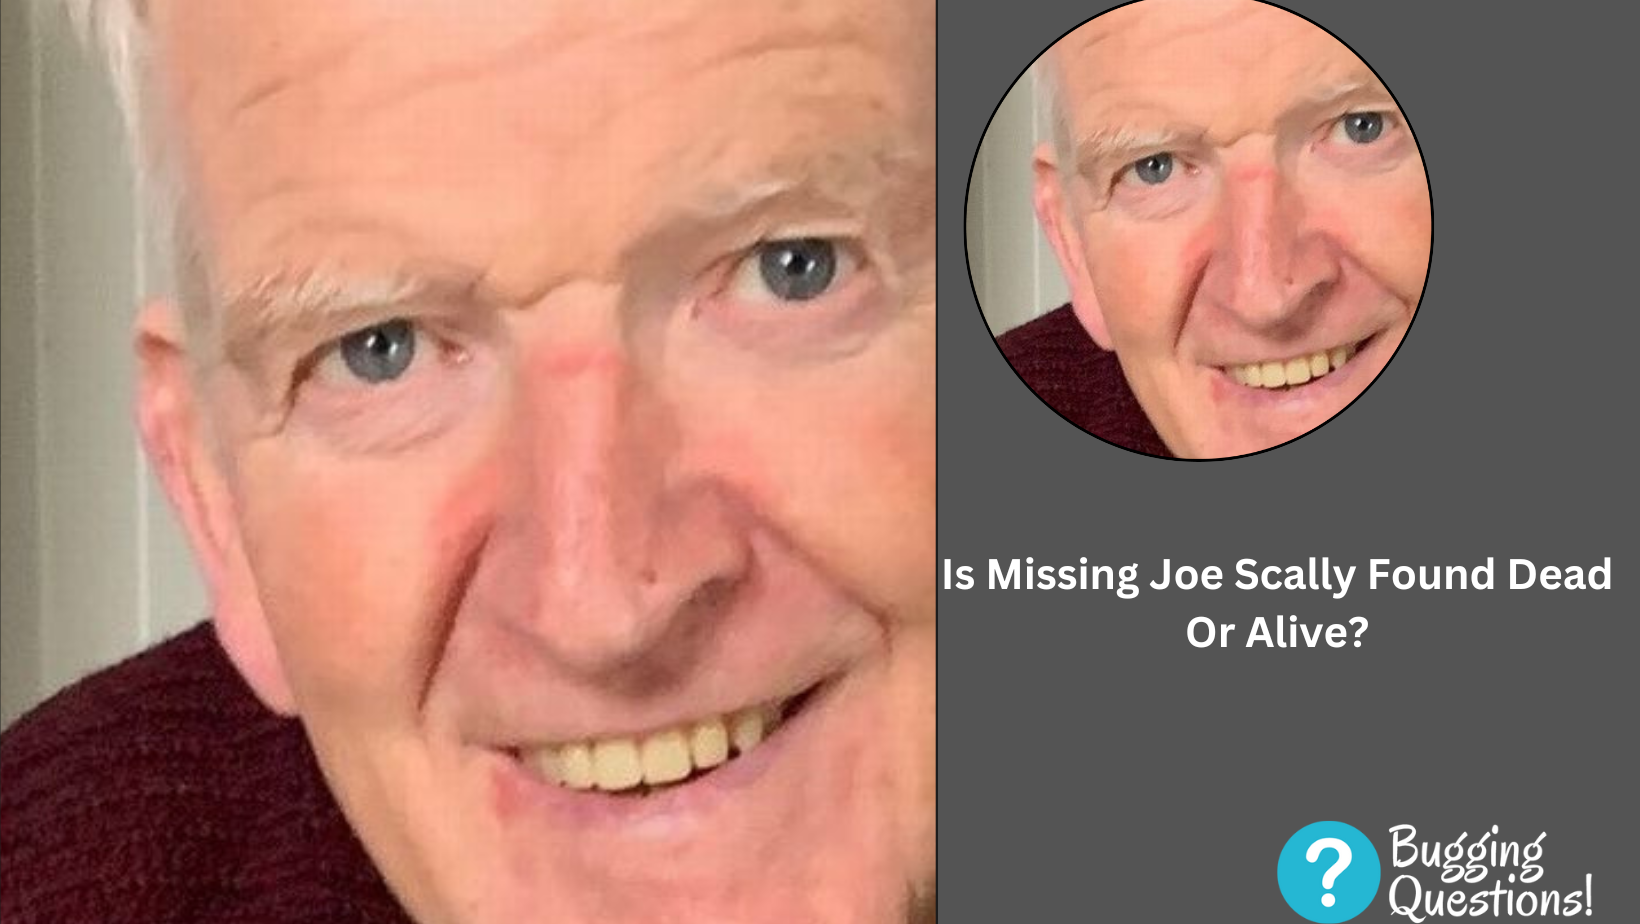 Is Missing Joe Scally Found Dead Or Alive?